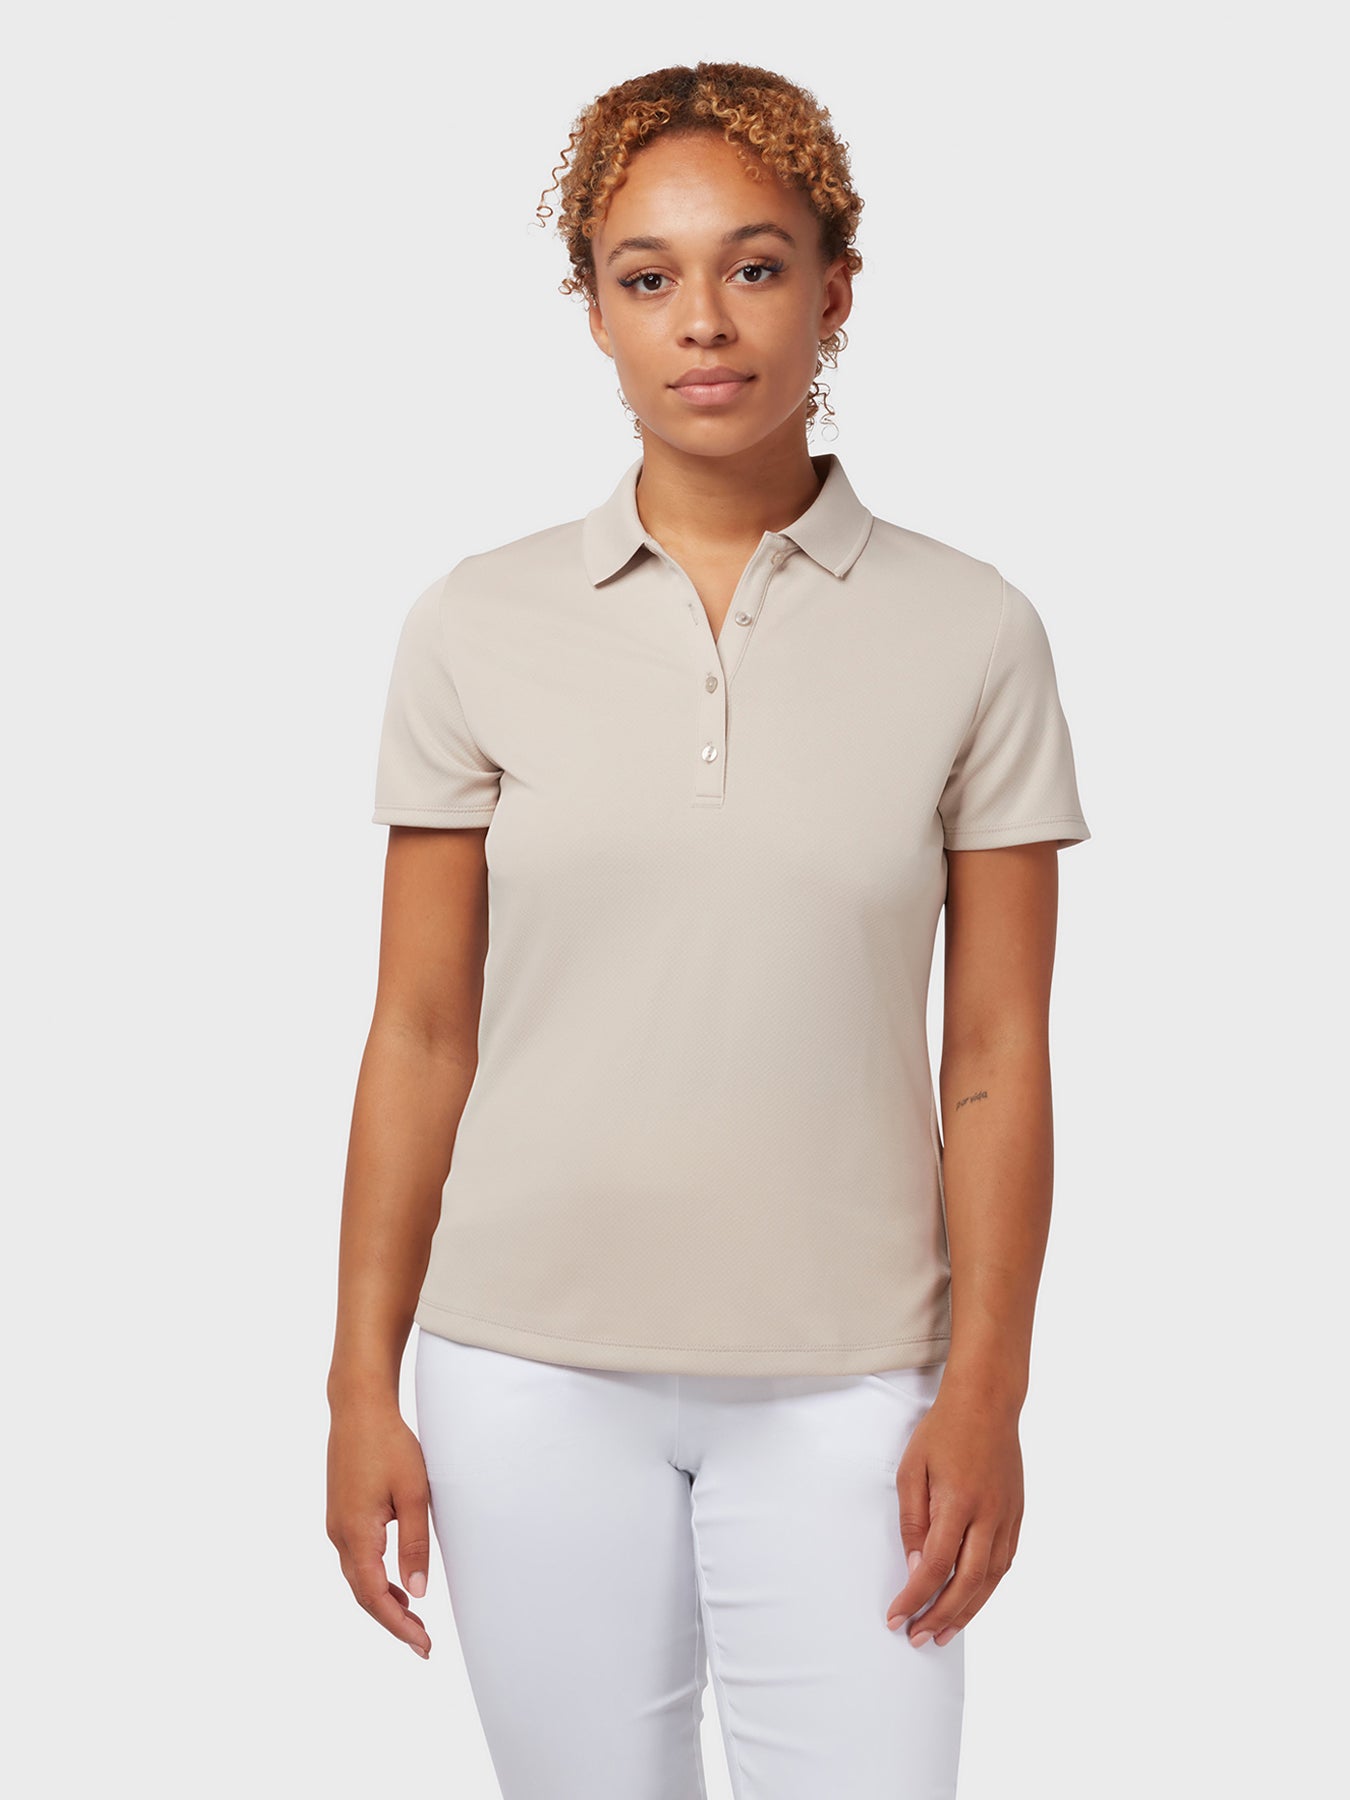 View Swing Tech Womens Polo In Chateau Grey Chateau Grey XS information